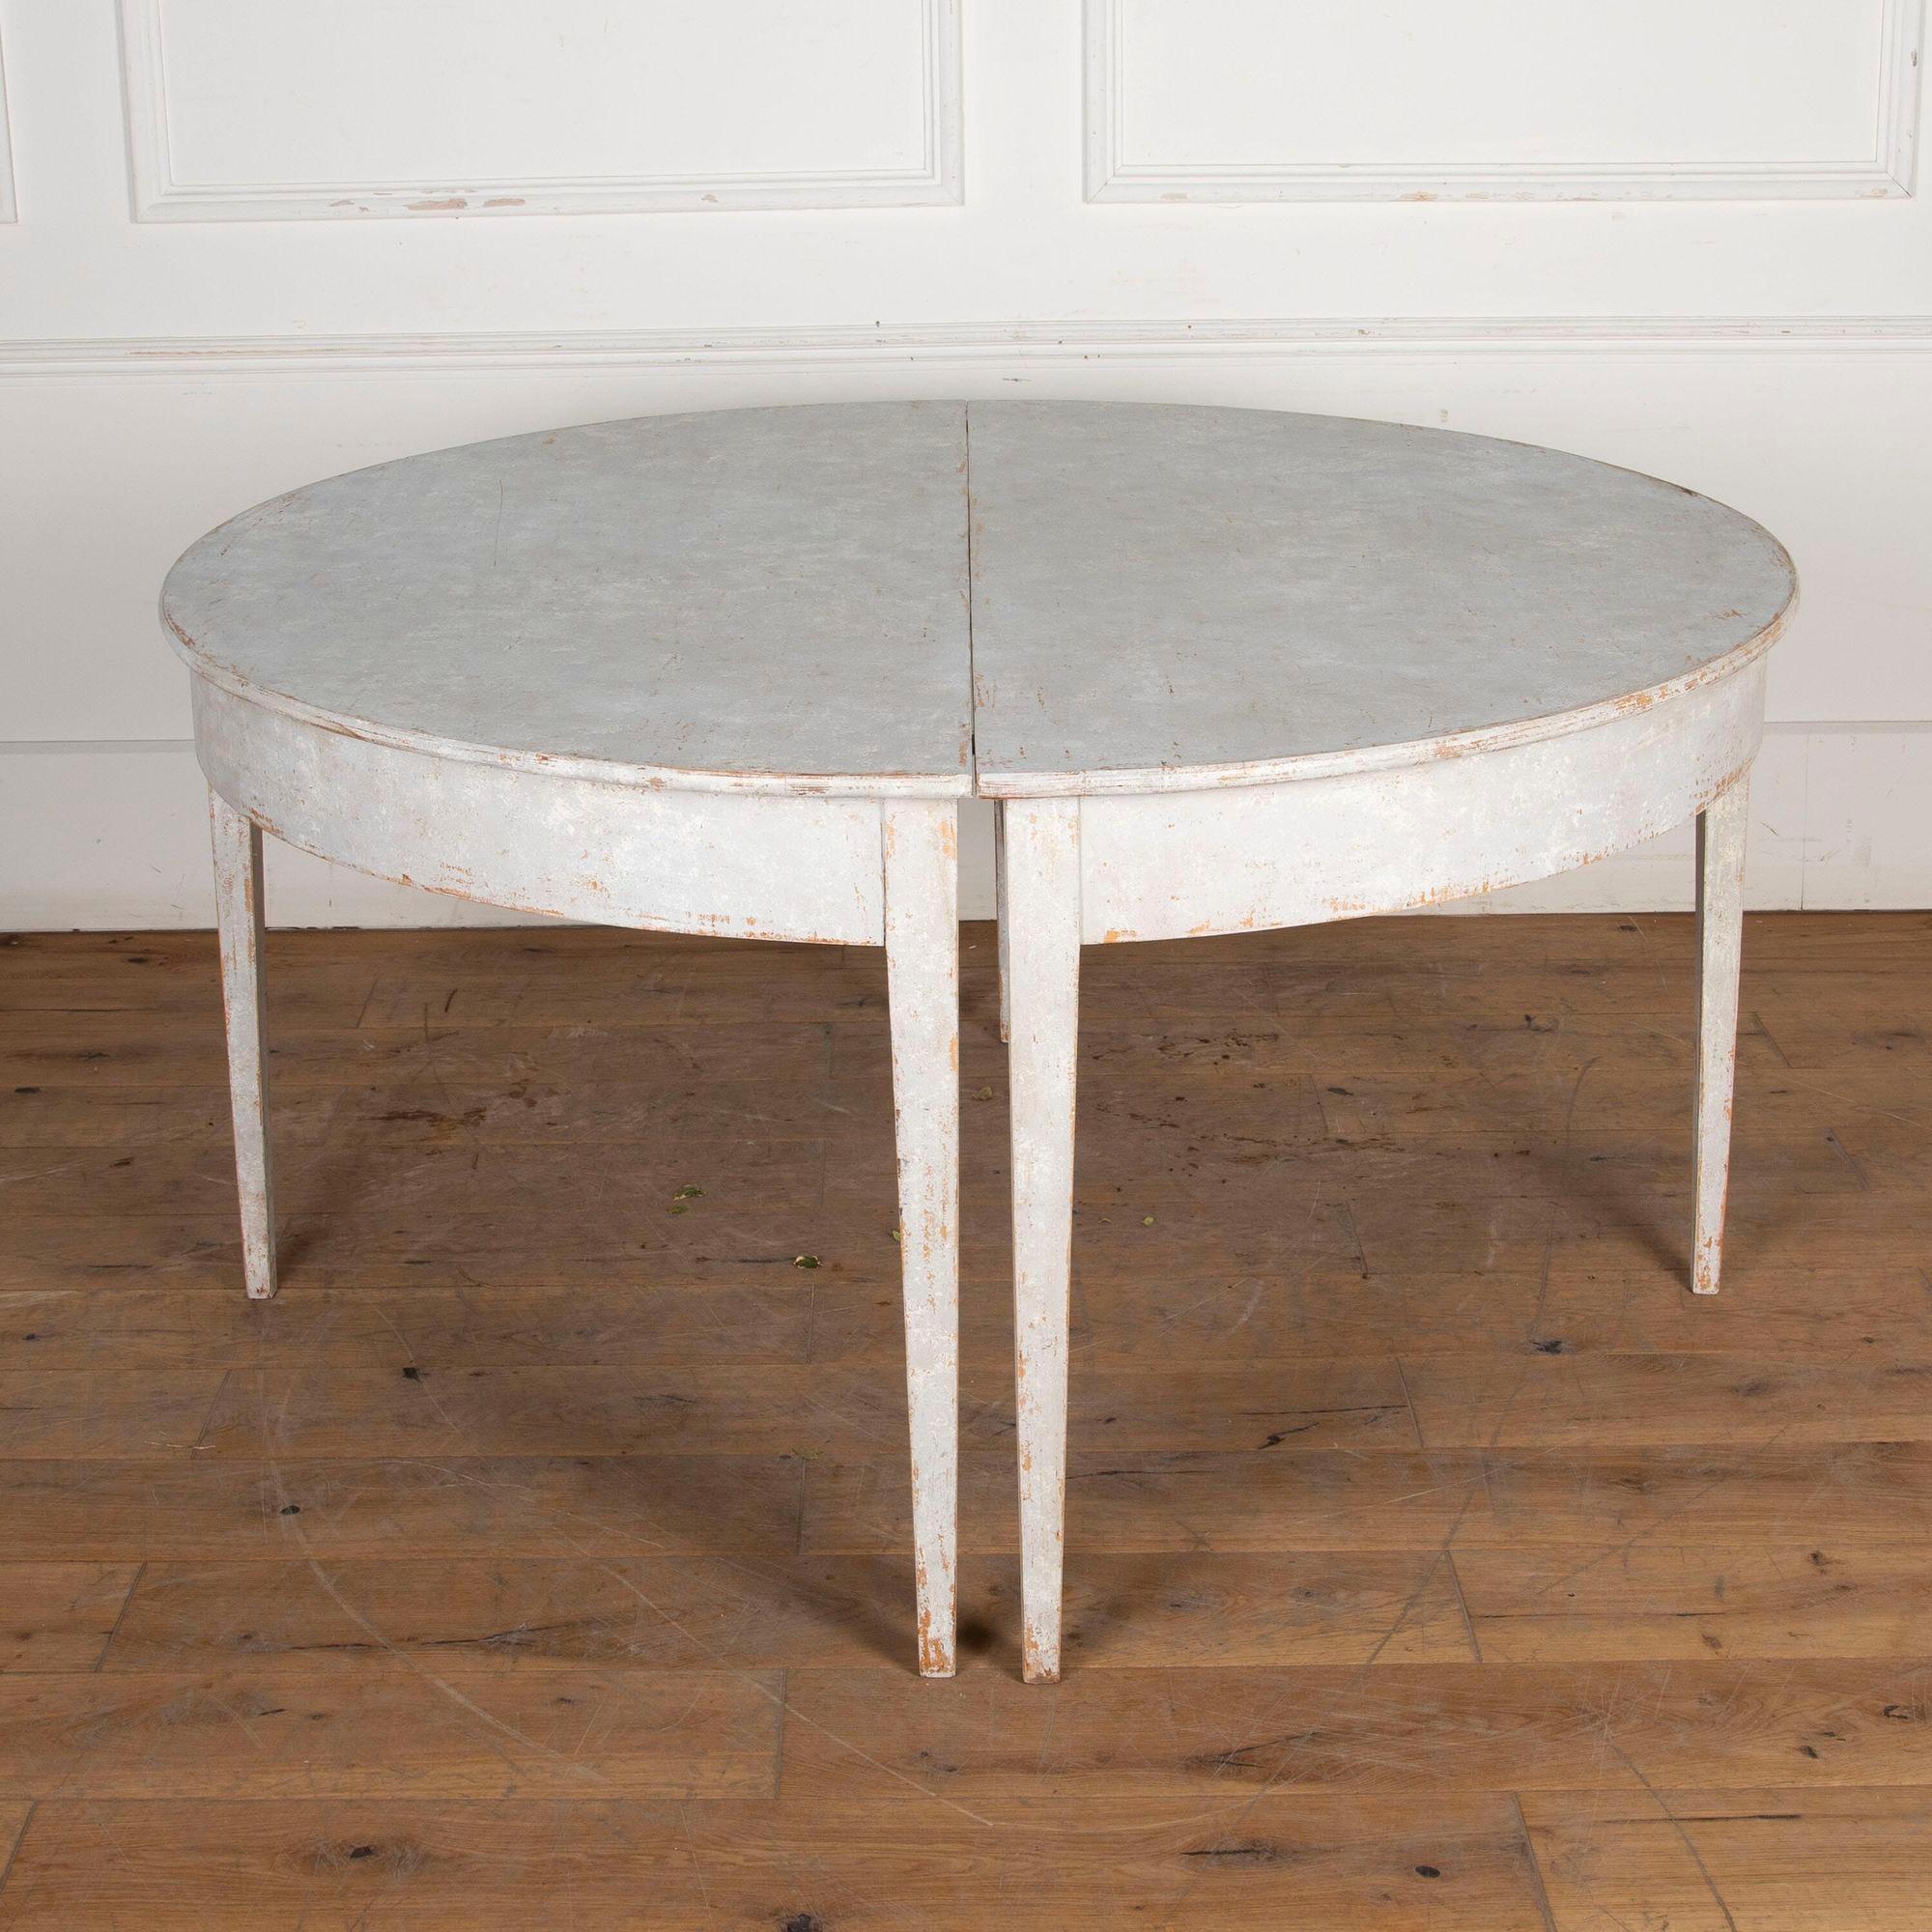 Early 19th century Gustavian extending dining table comprising two demi lunes, and two leaves.
Each demi lune : H 75 x W 146 x D 72cm.
Each leaf: W 146 x D 60cm.